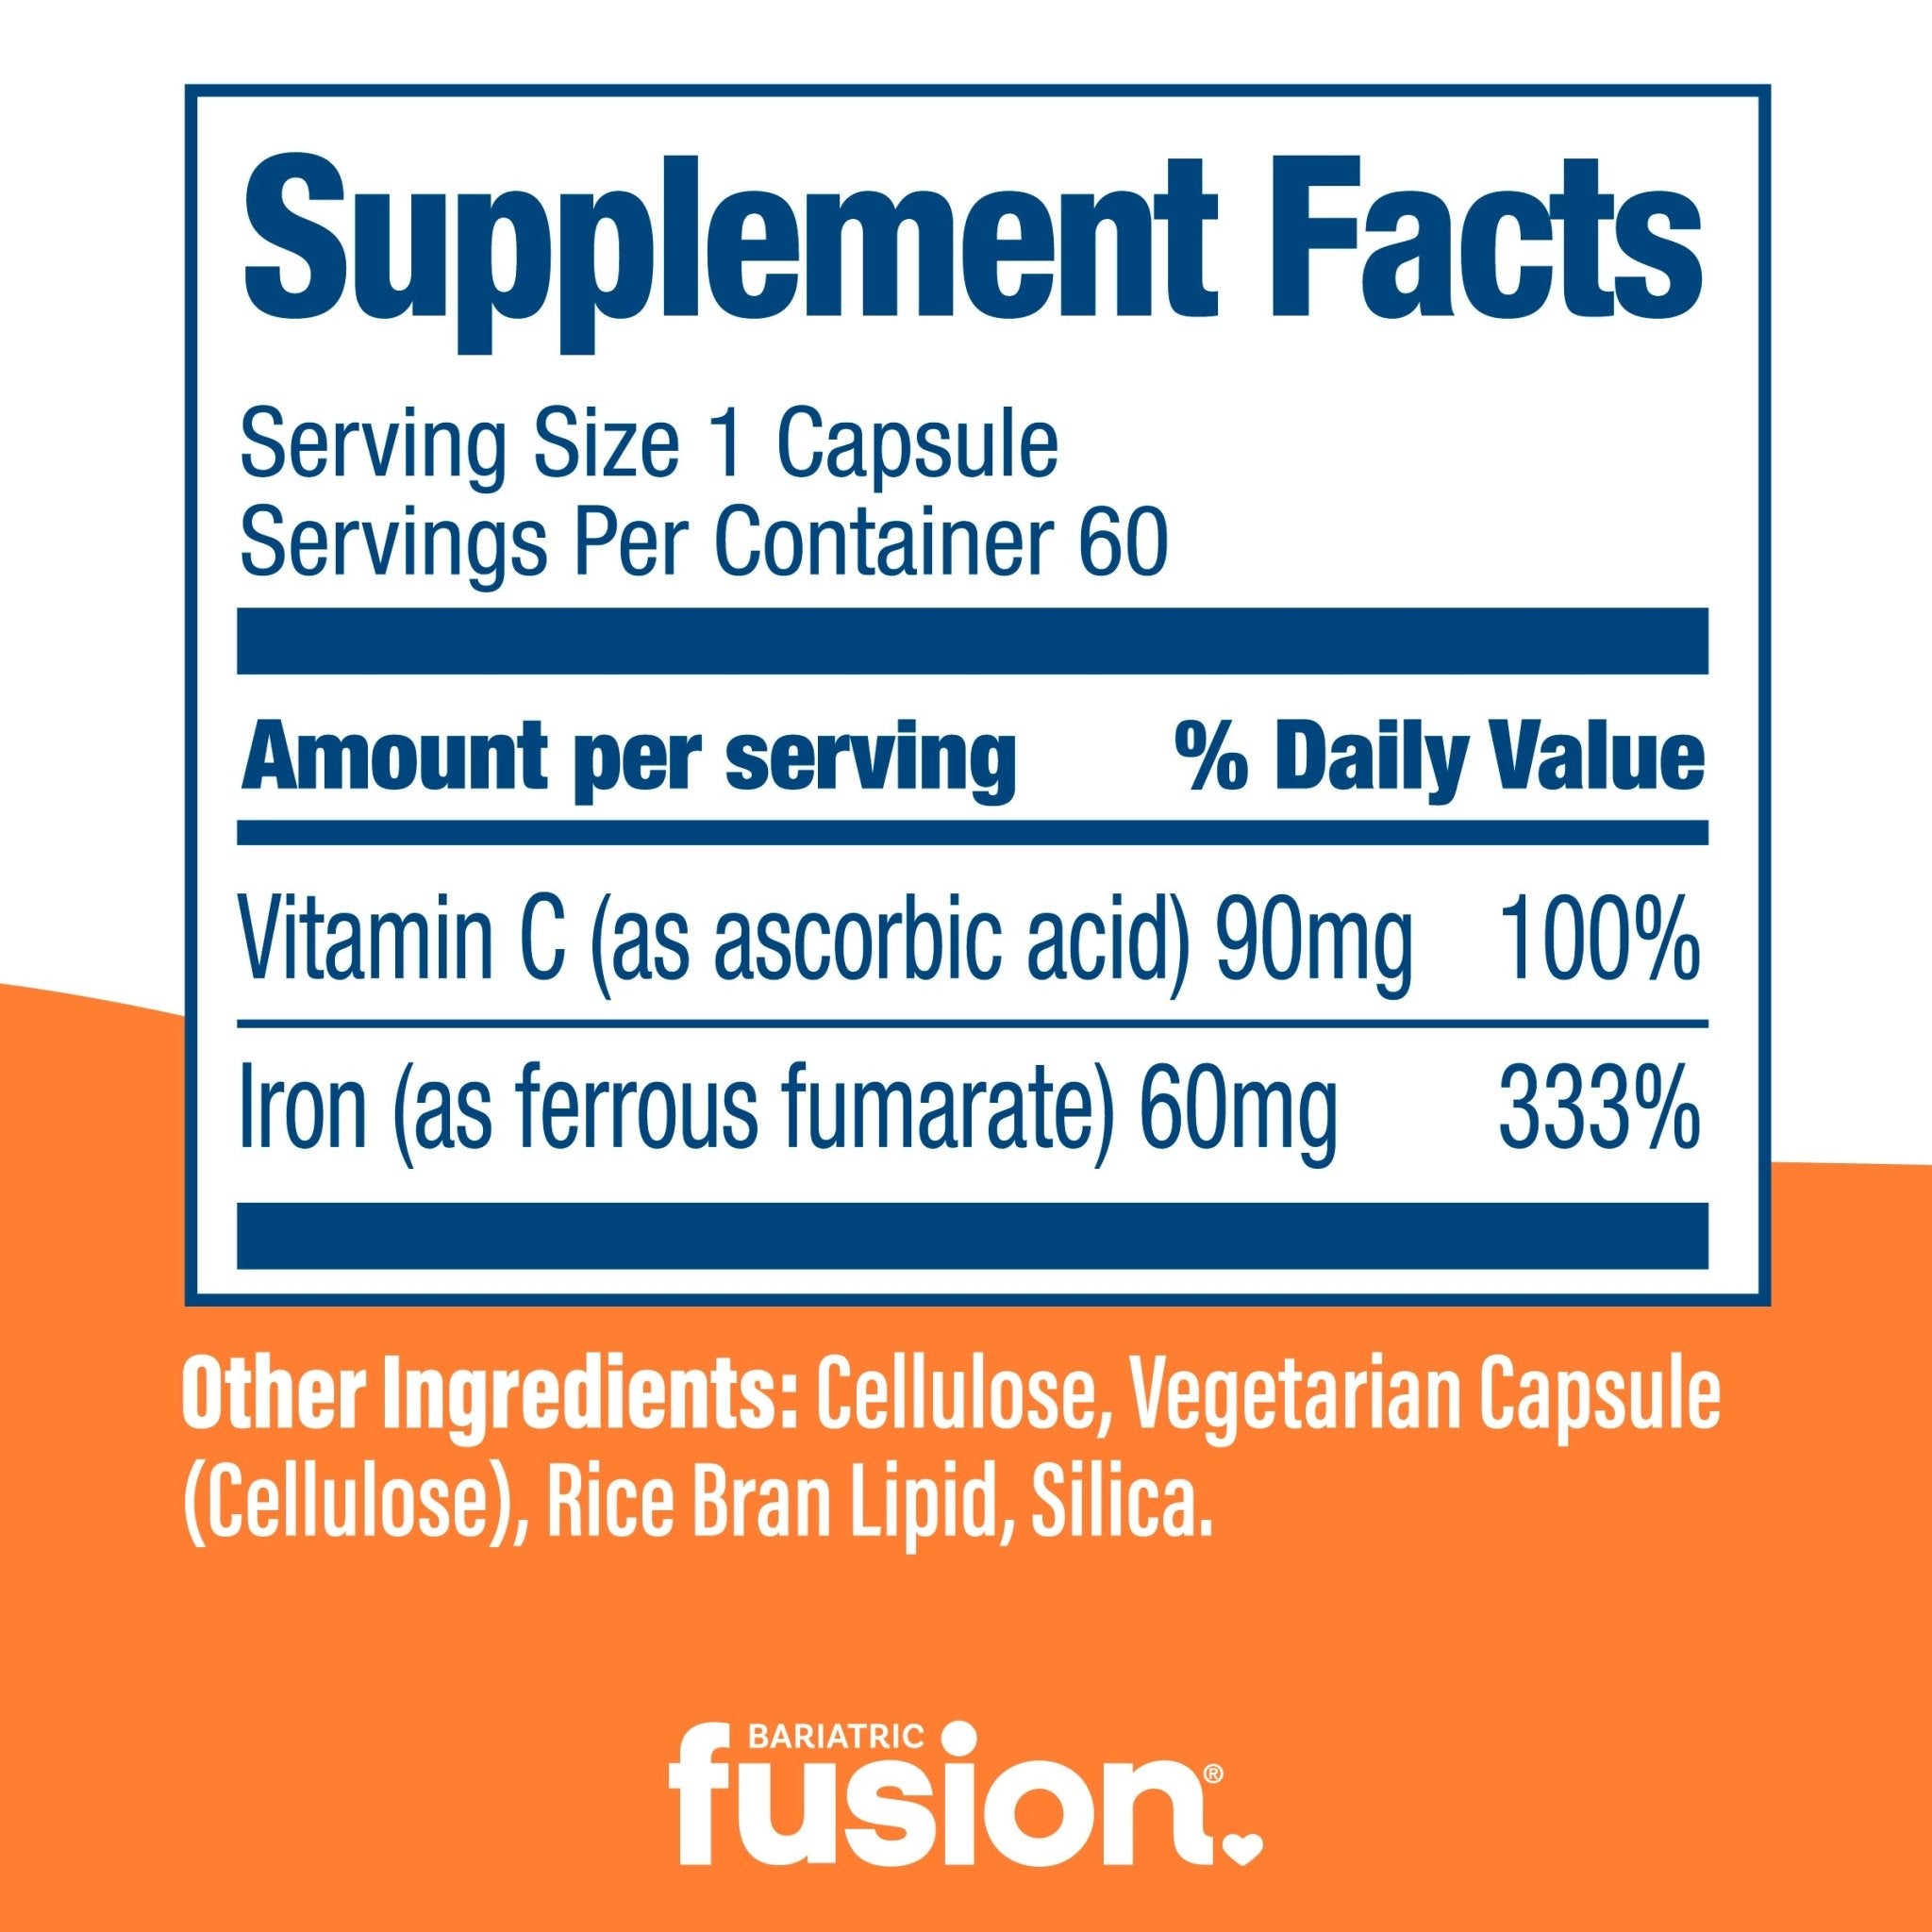 Bariatric Iron Capsule with Vitamin C 45mg Iron supplement facts.